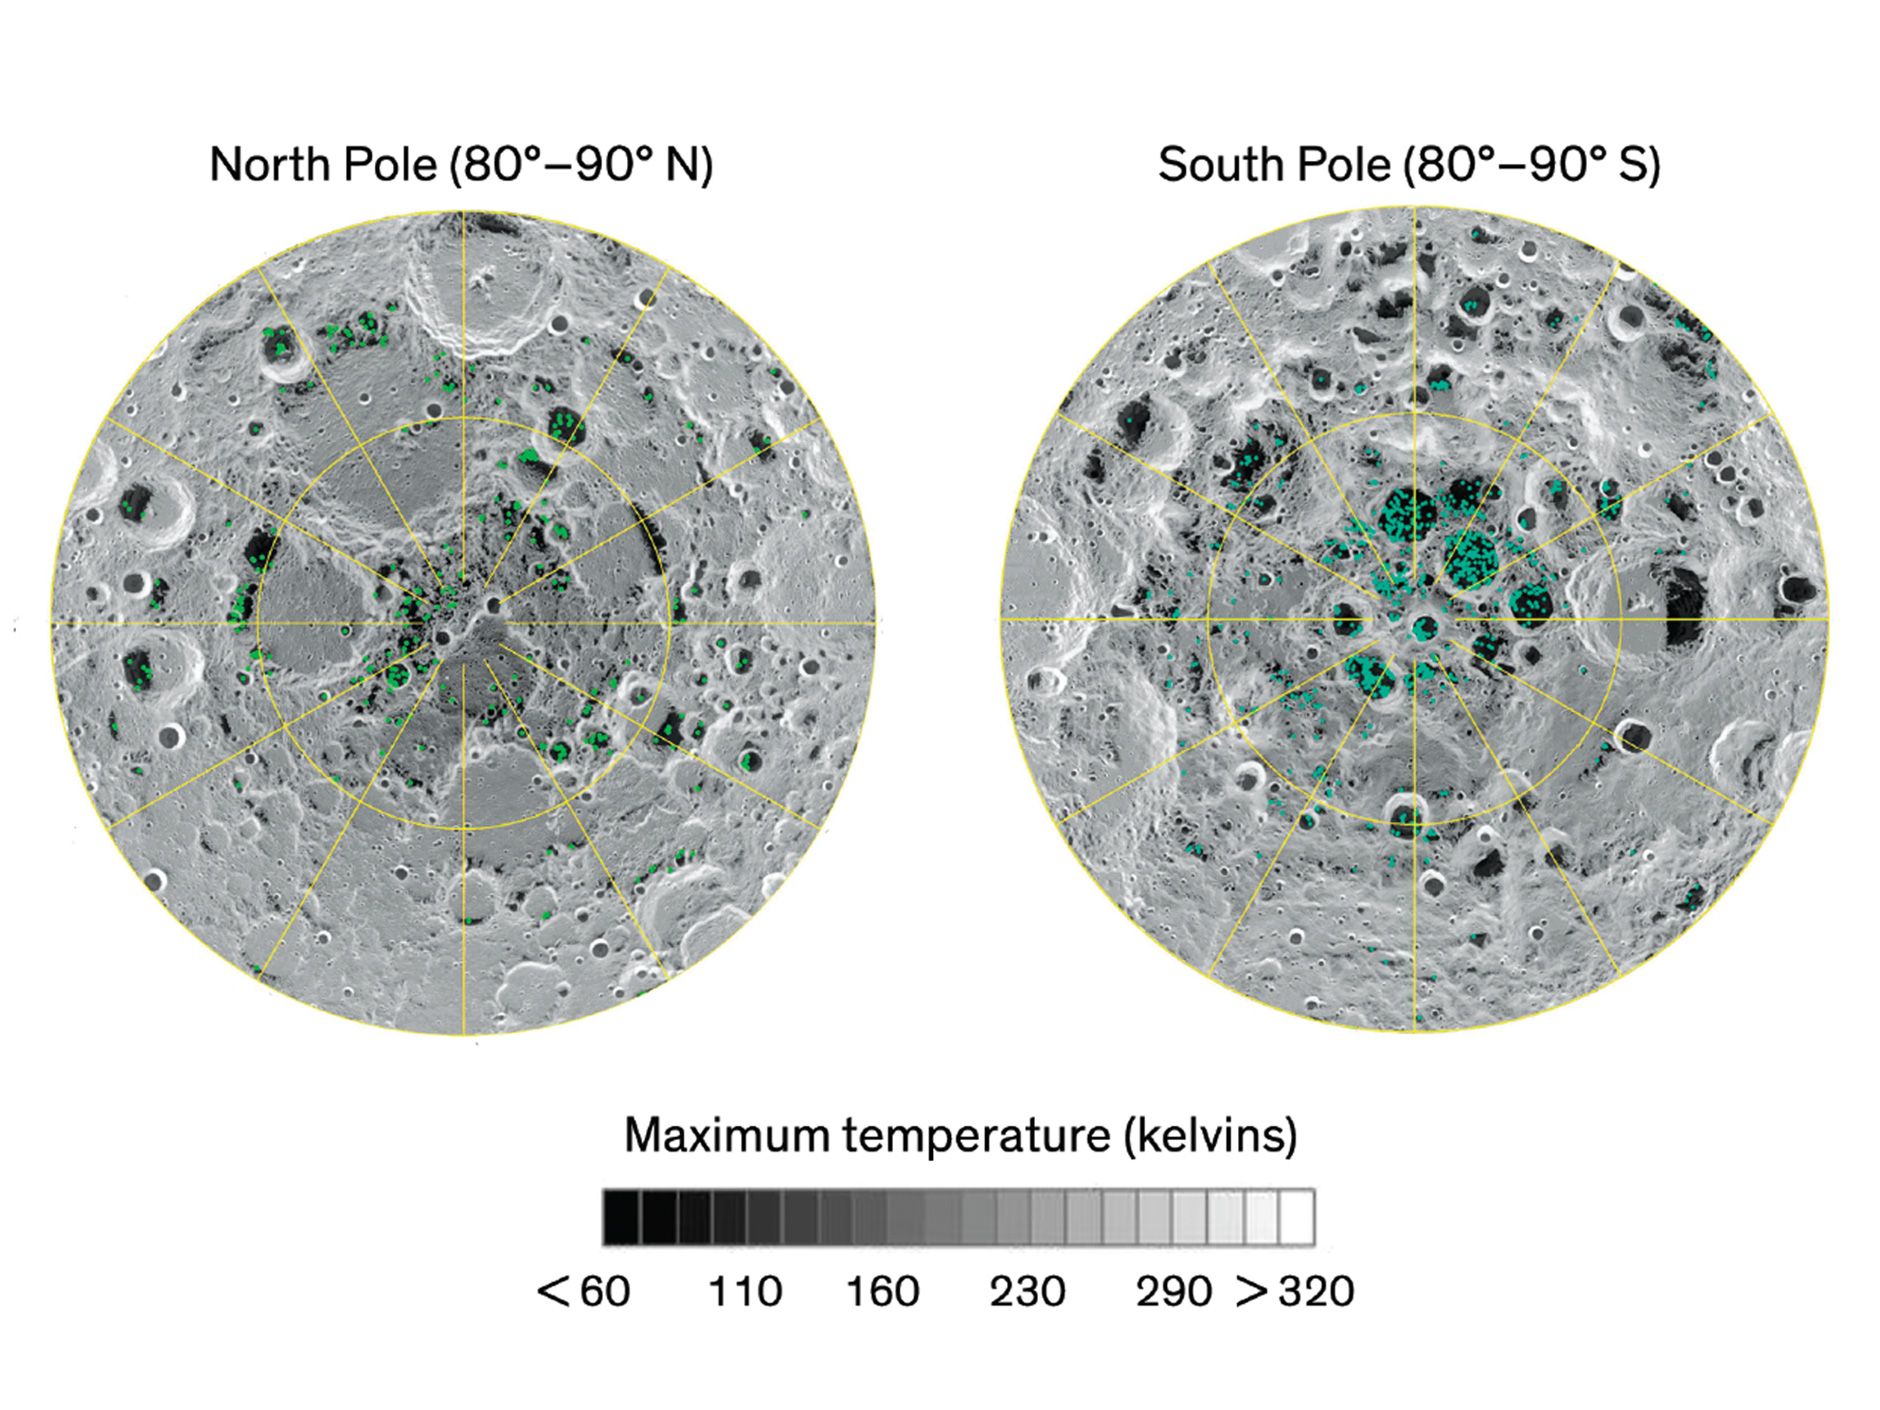 <b>Mapping the Moon:</b> Several lunar missions have produced strong evidence of water ice. A <a href="https://www.nasa.gov/">NASA</a> instrument called the <a href="https://solarsystem.nasa.gov/missions/chandrayaan-1/in-depth/">Moon Mineralogy Mapper</a> (M3) found indications of water ice on the permanently shadowed floors of some polar craters. However, the measurements suggest that only a small fraction of cold traps contain ice [colored areas], and that the ice is probably mixed with lunar regolith. <a href="https://www.pnas.org/content/115/36/8907">Data source.</a>